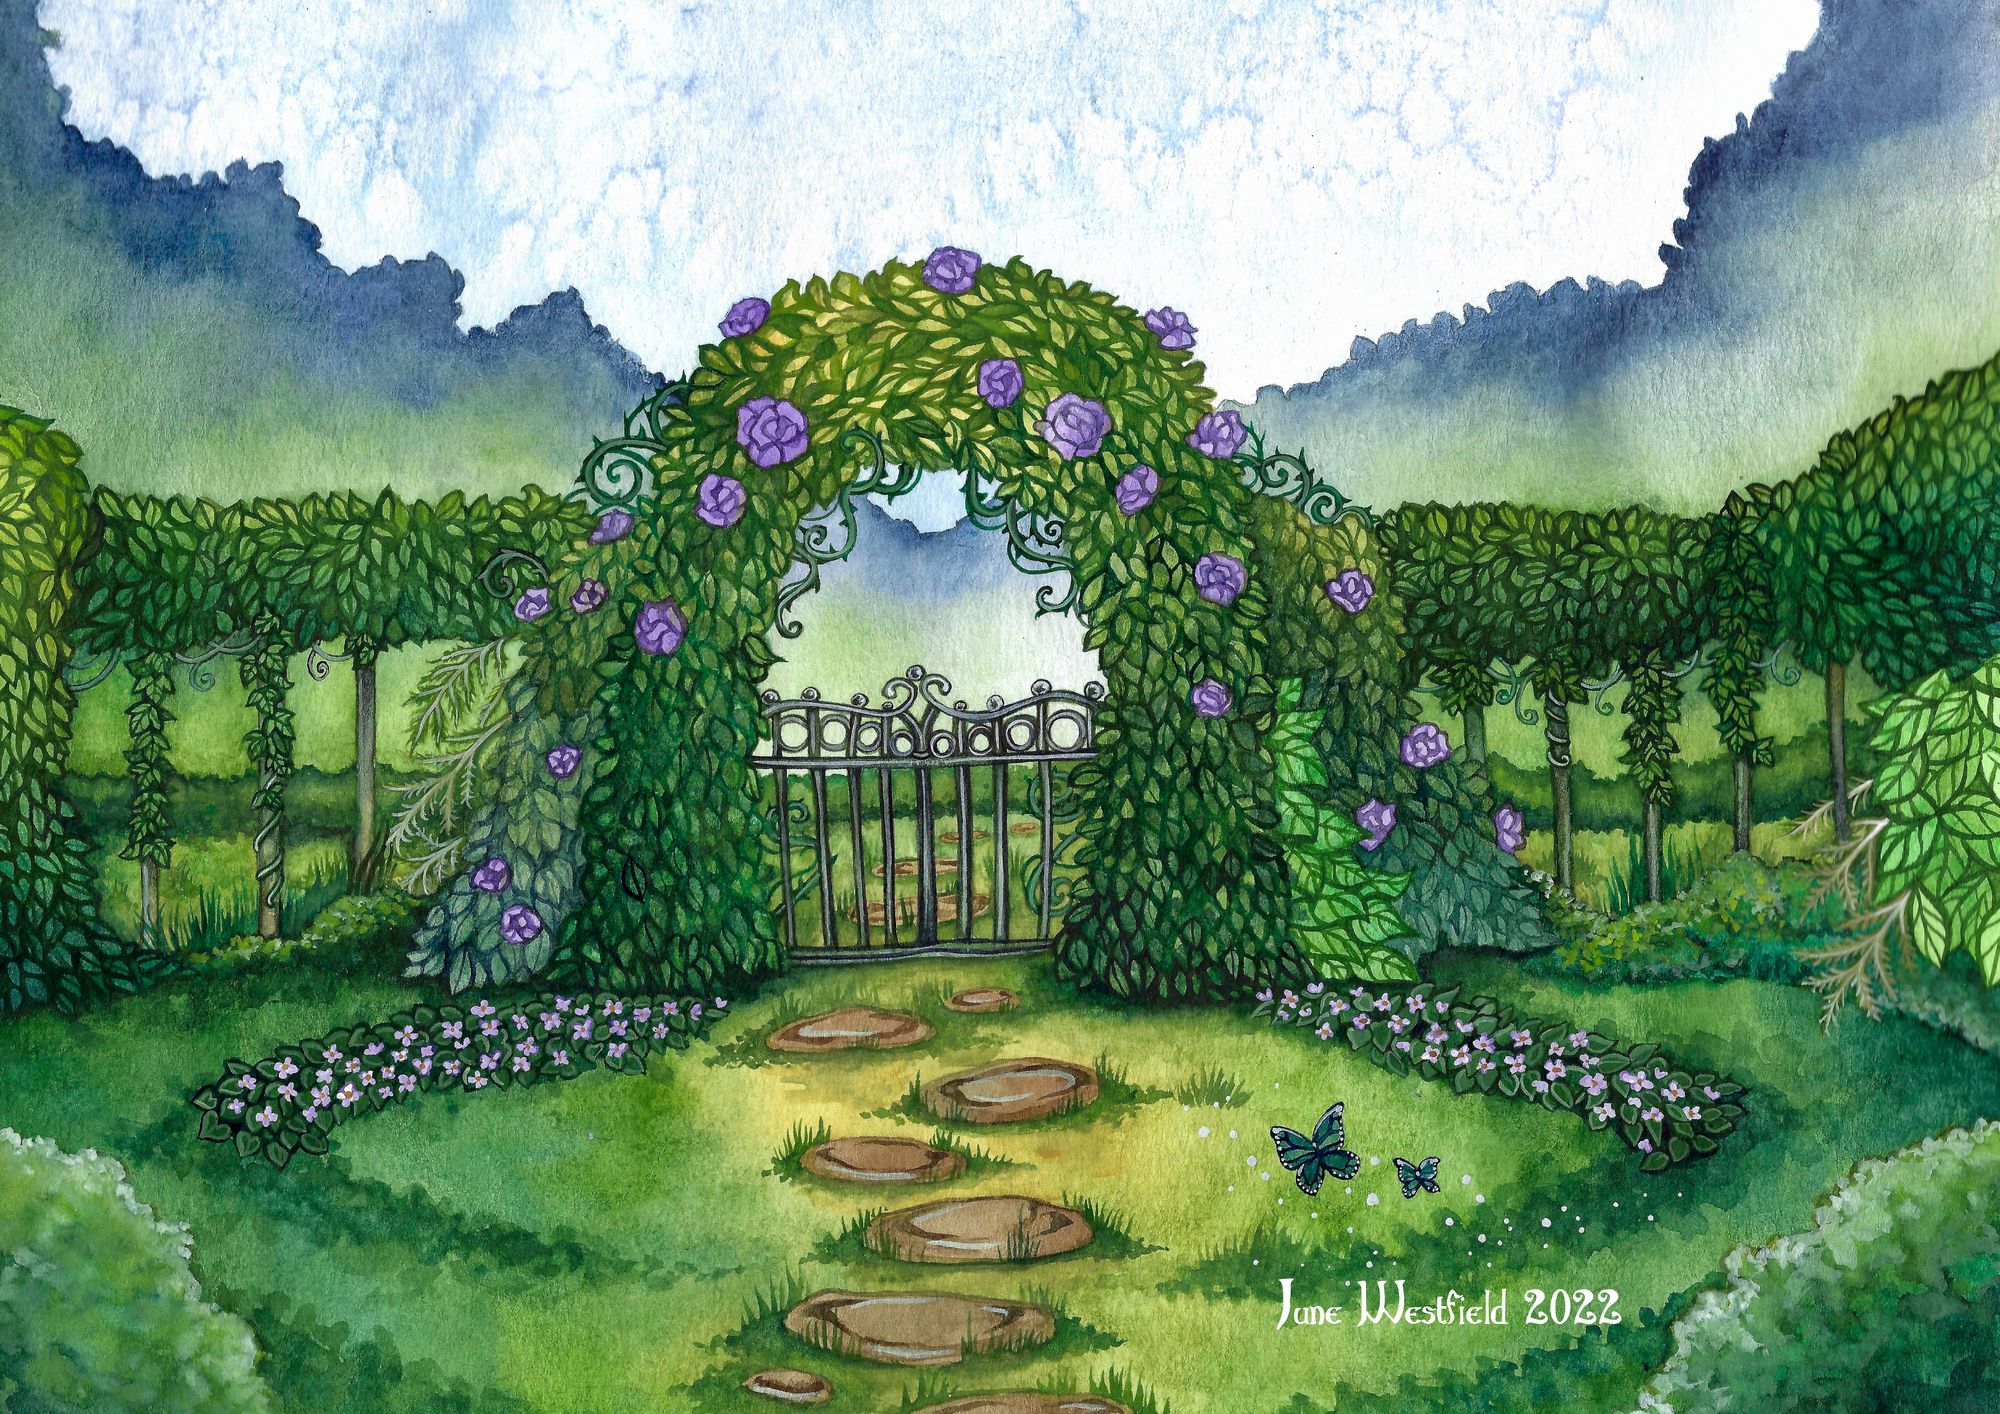 A magical green garden with a purple rose hedge, violets on either side of the path leading to a gate, and blue butterflies on the lower right.